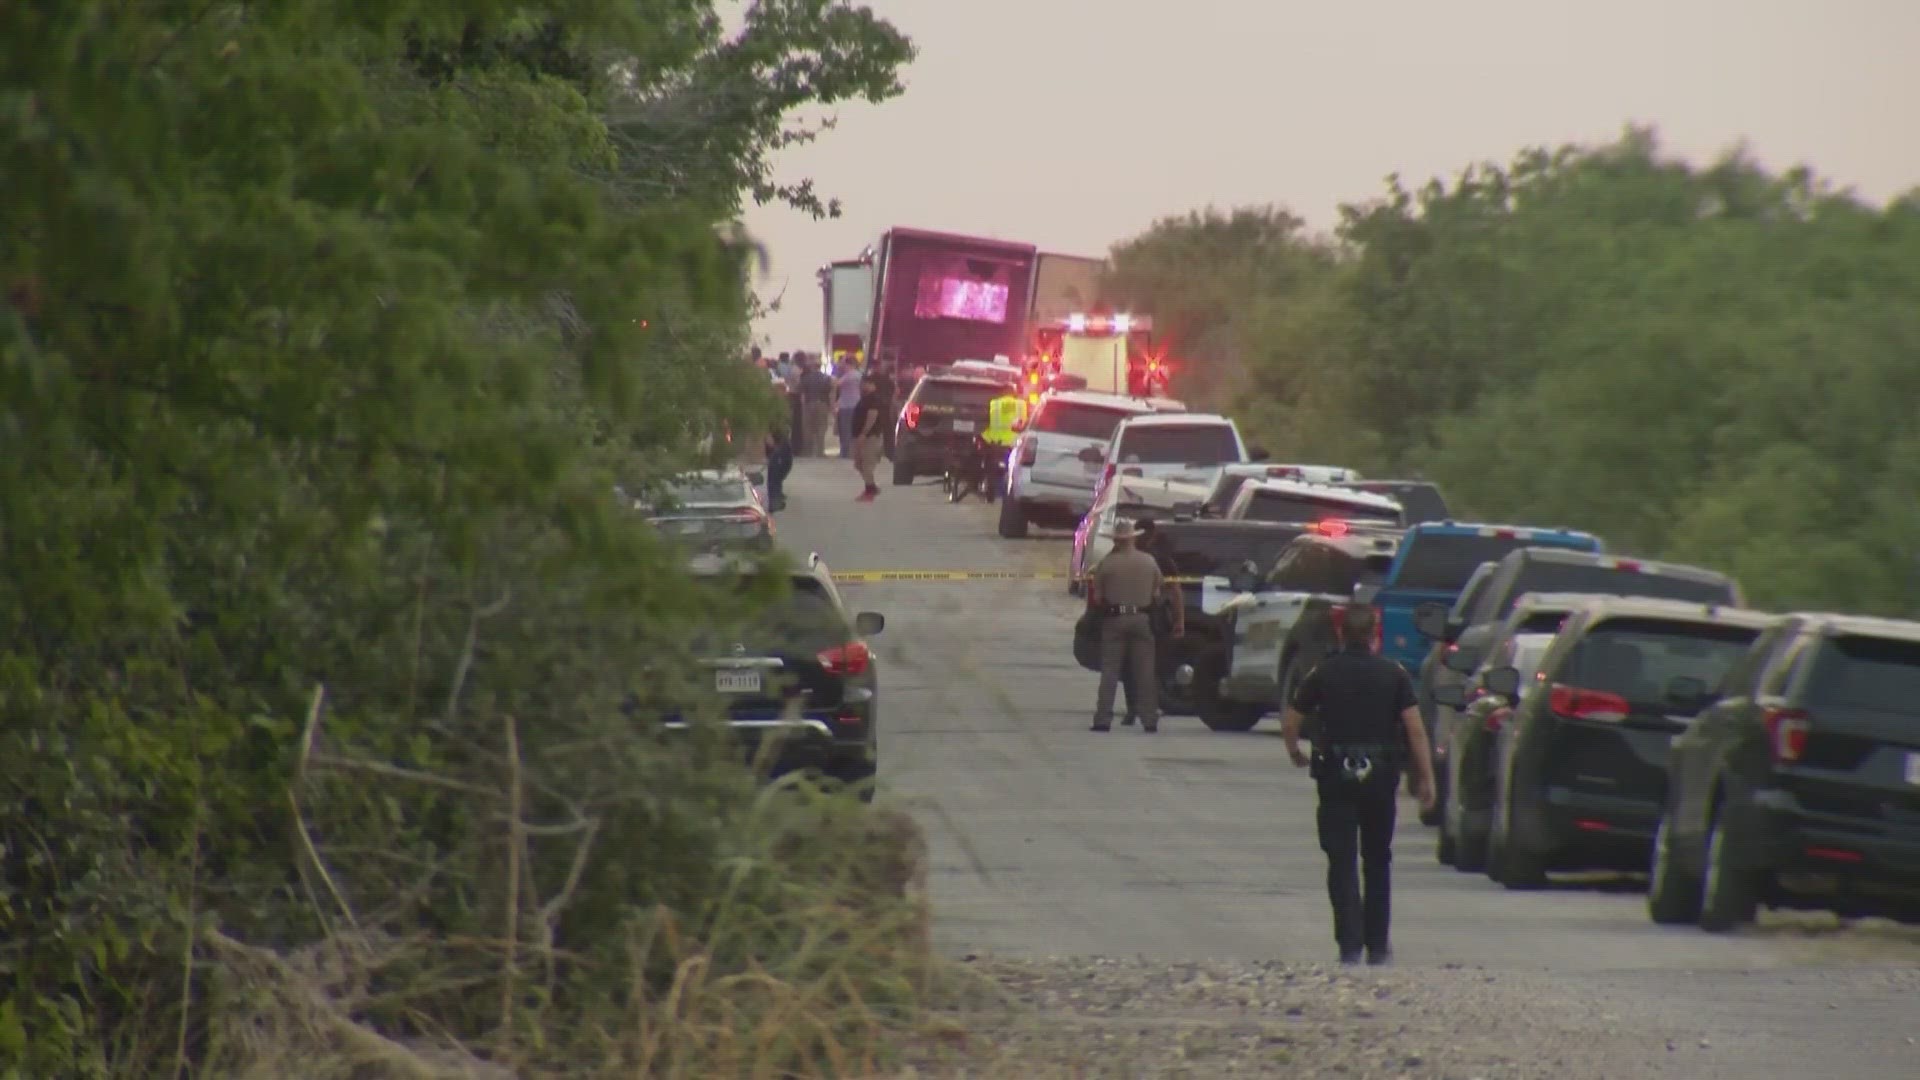 Dozens of migrants including children were inside the tractor-trailer that had no working AC.